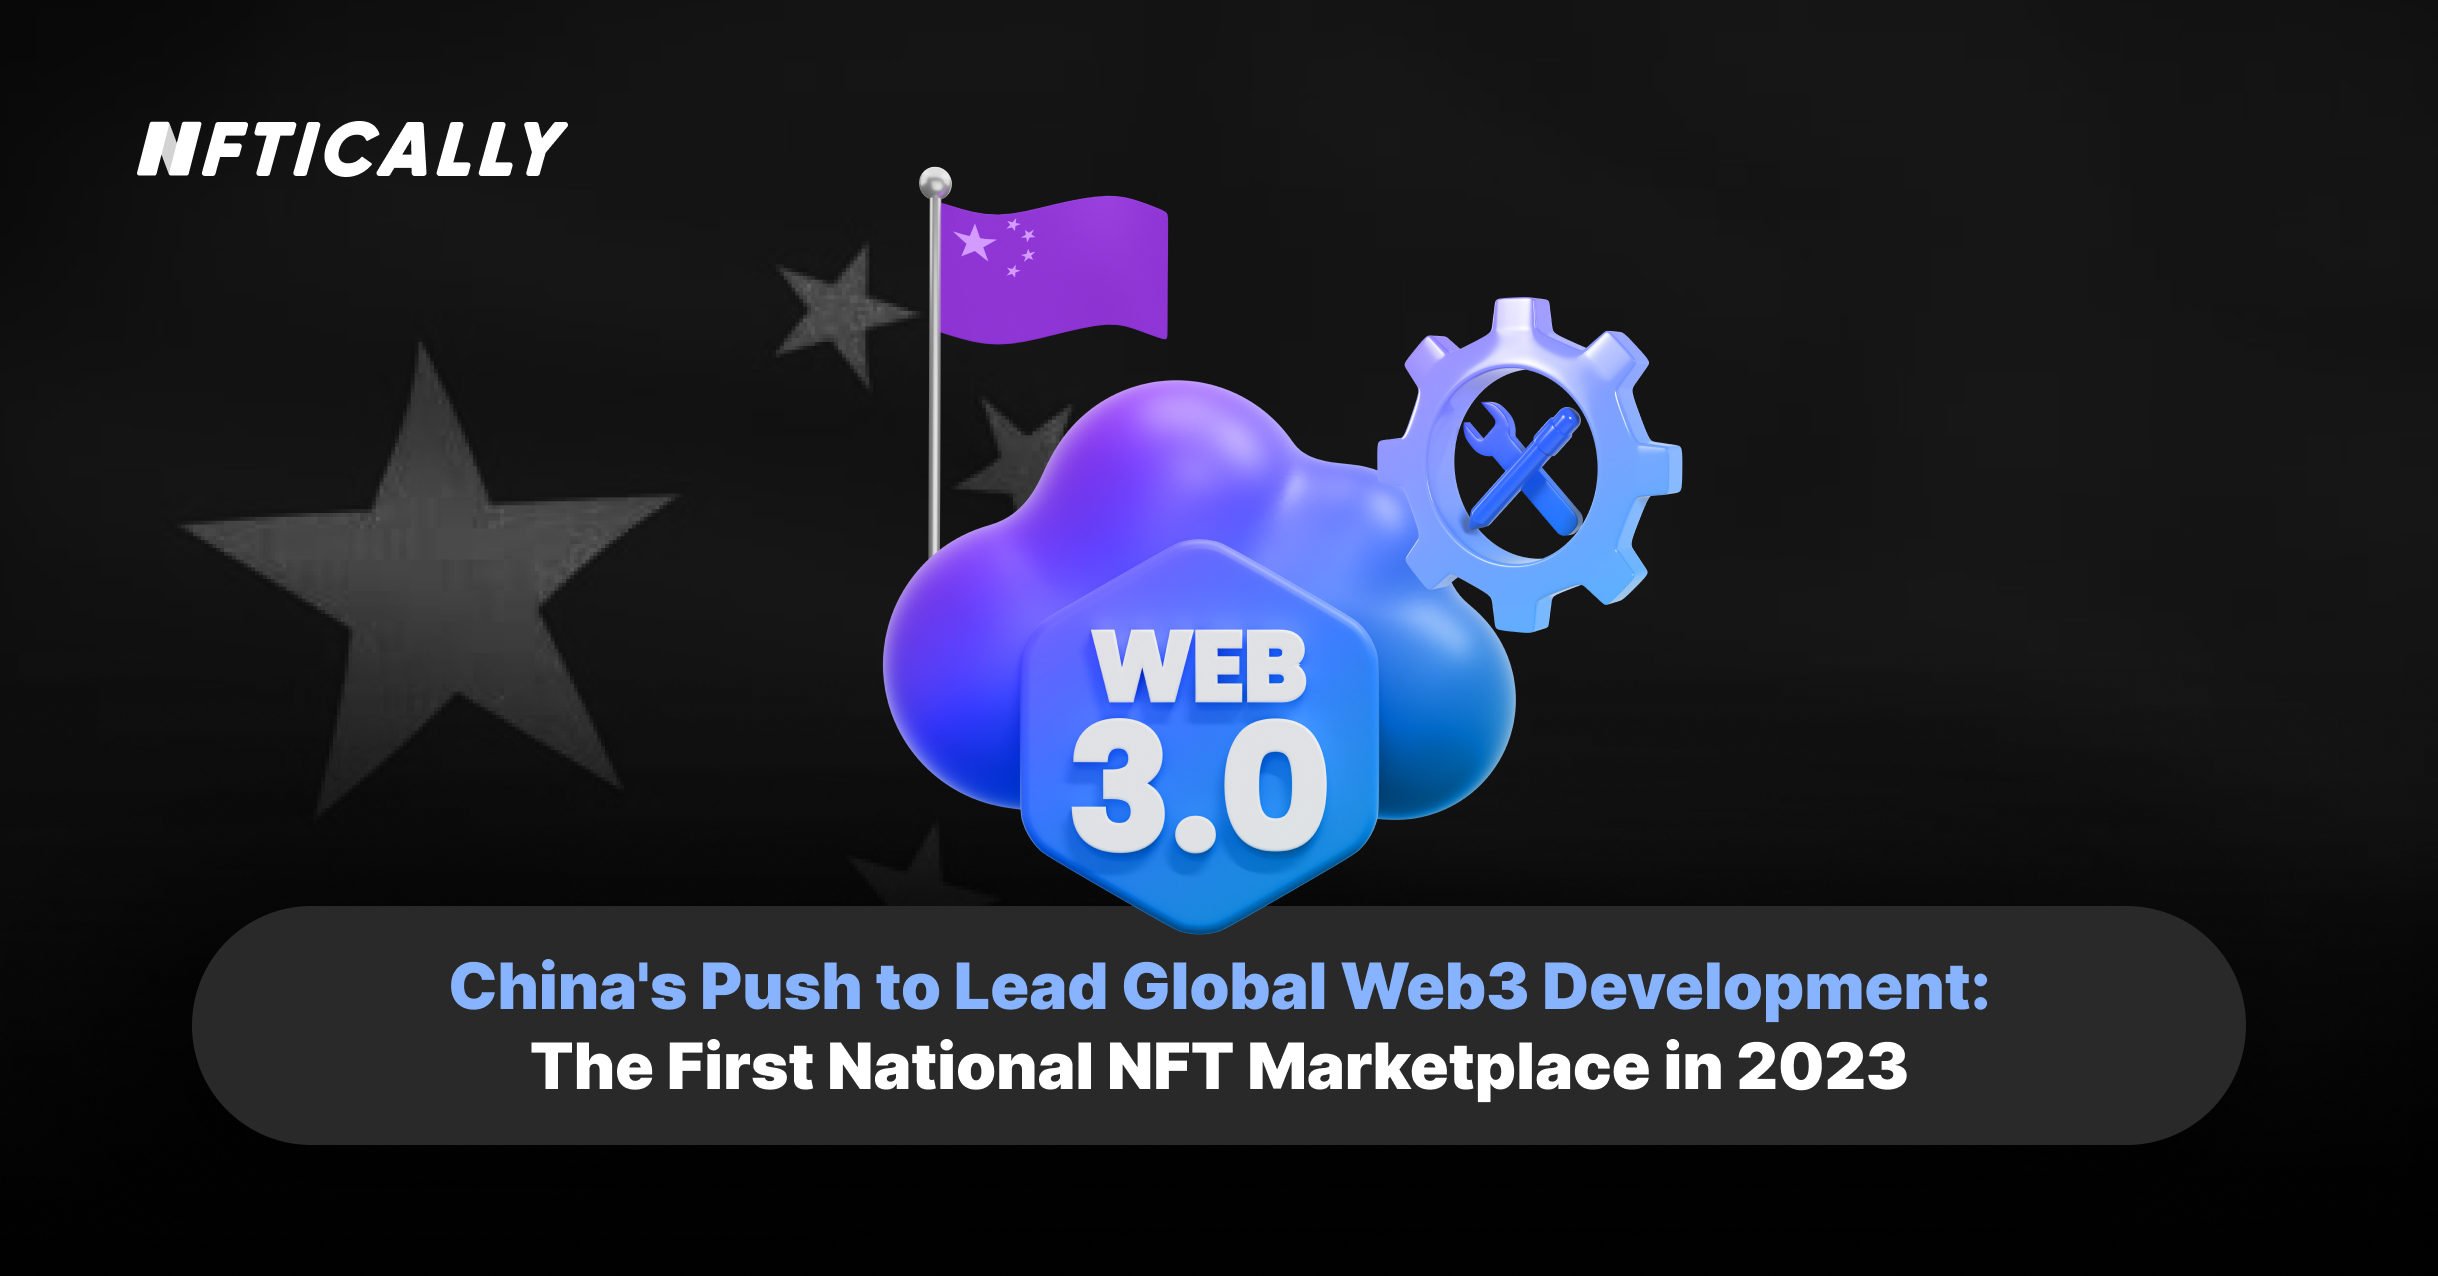 China’s Push to Lead Global Web3 Development: The First National NFT Marketplace in 2023